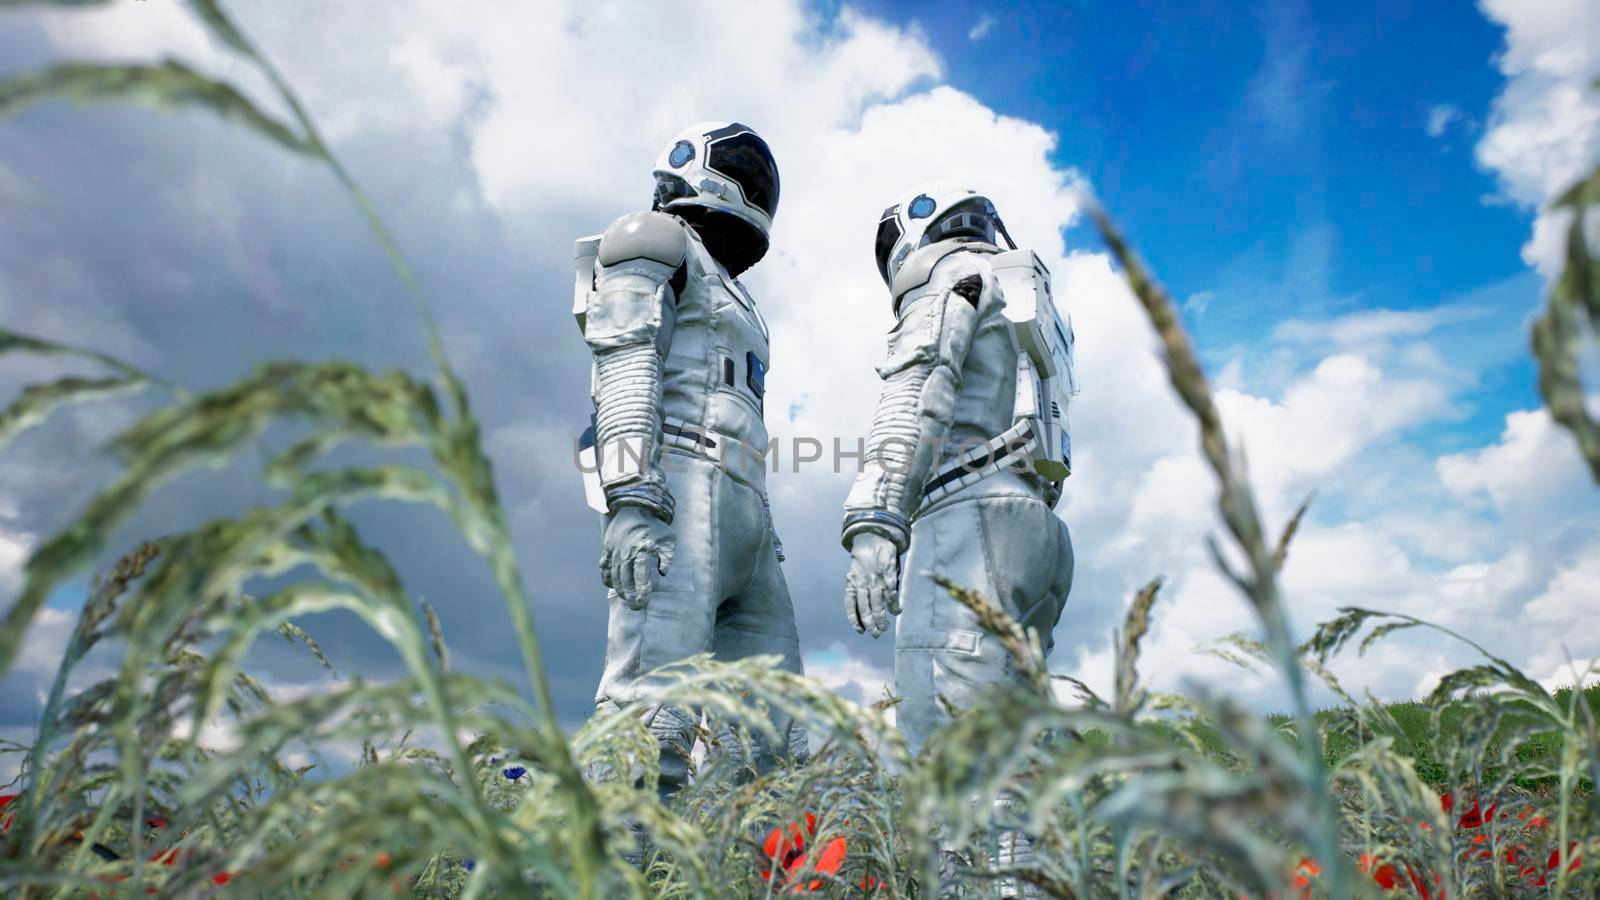 Meeting of two astronauts in love on an alien blooming planet. 3D Rendering. by designprojects